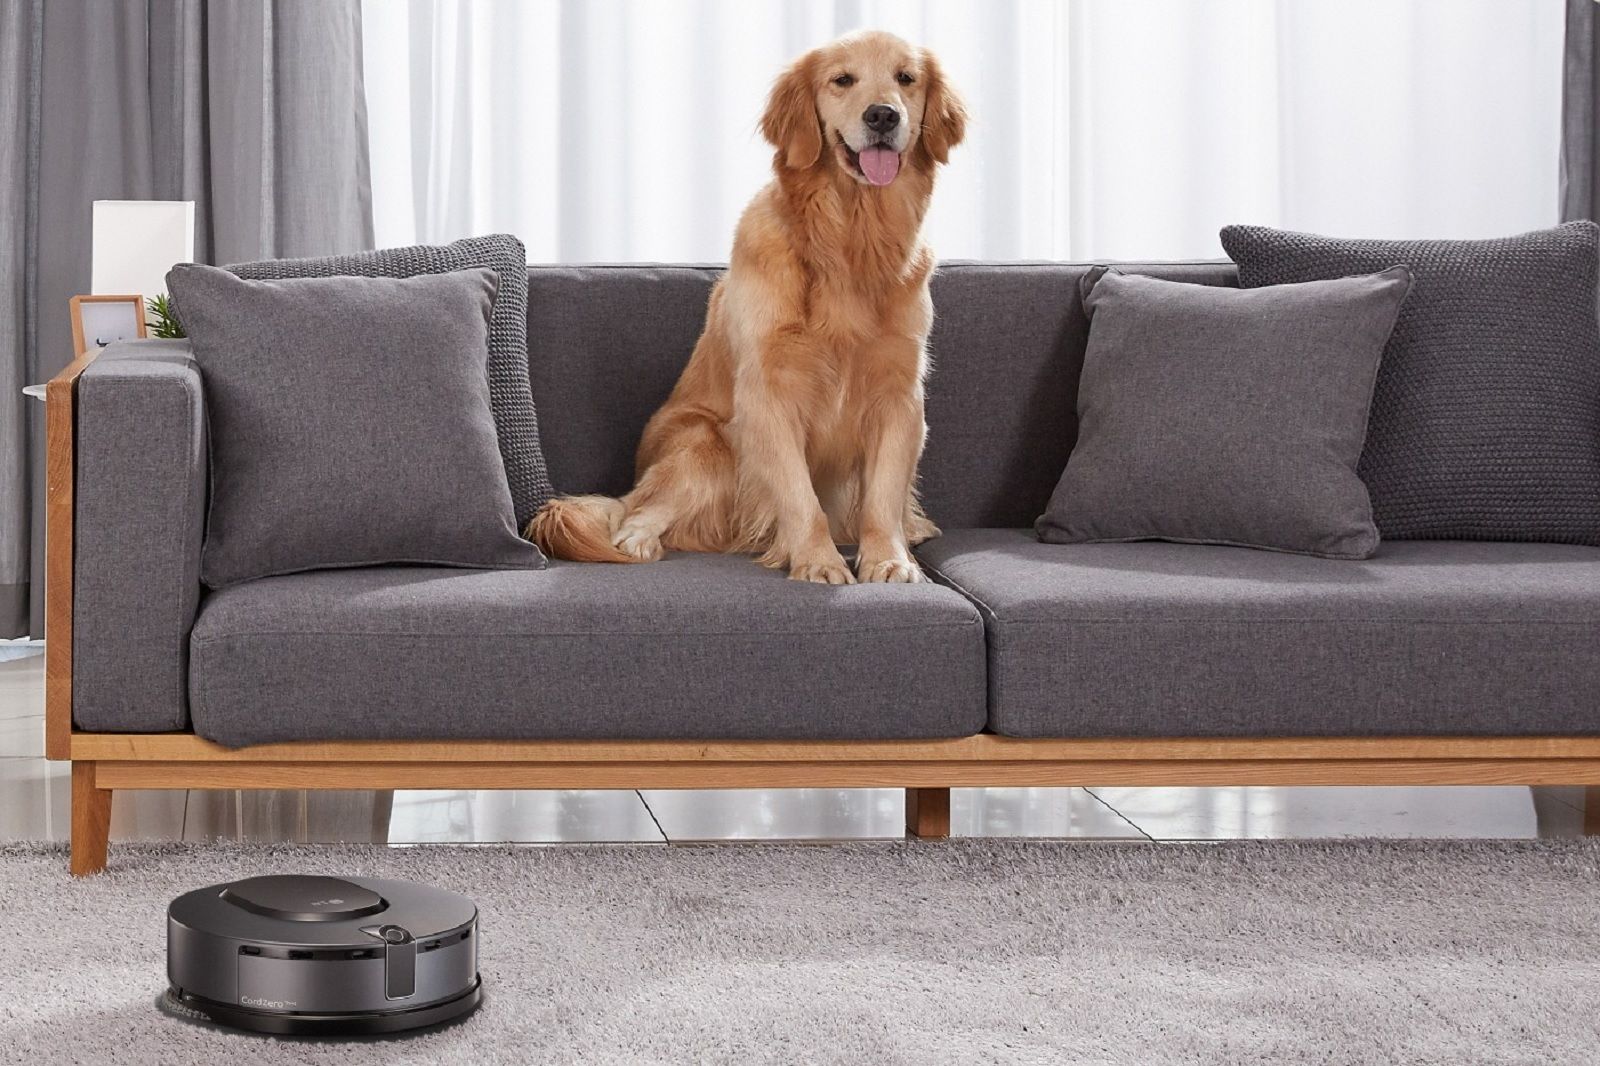 LG intends to mop-up at CES with CordZero ThingQ mopping tech image 1